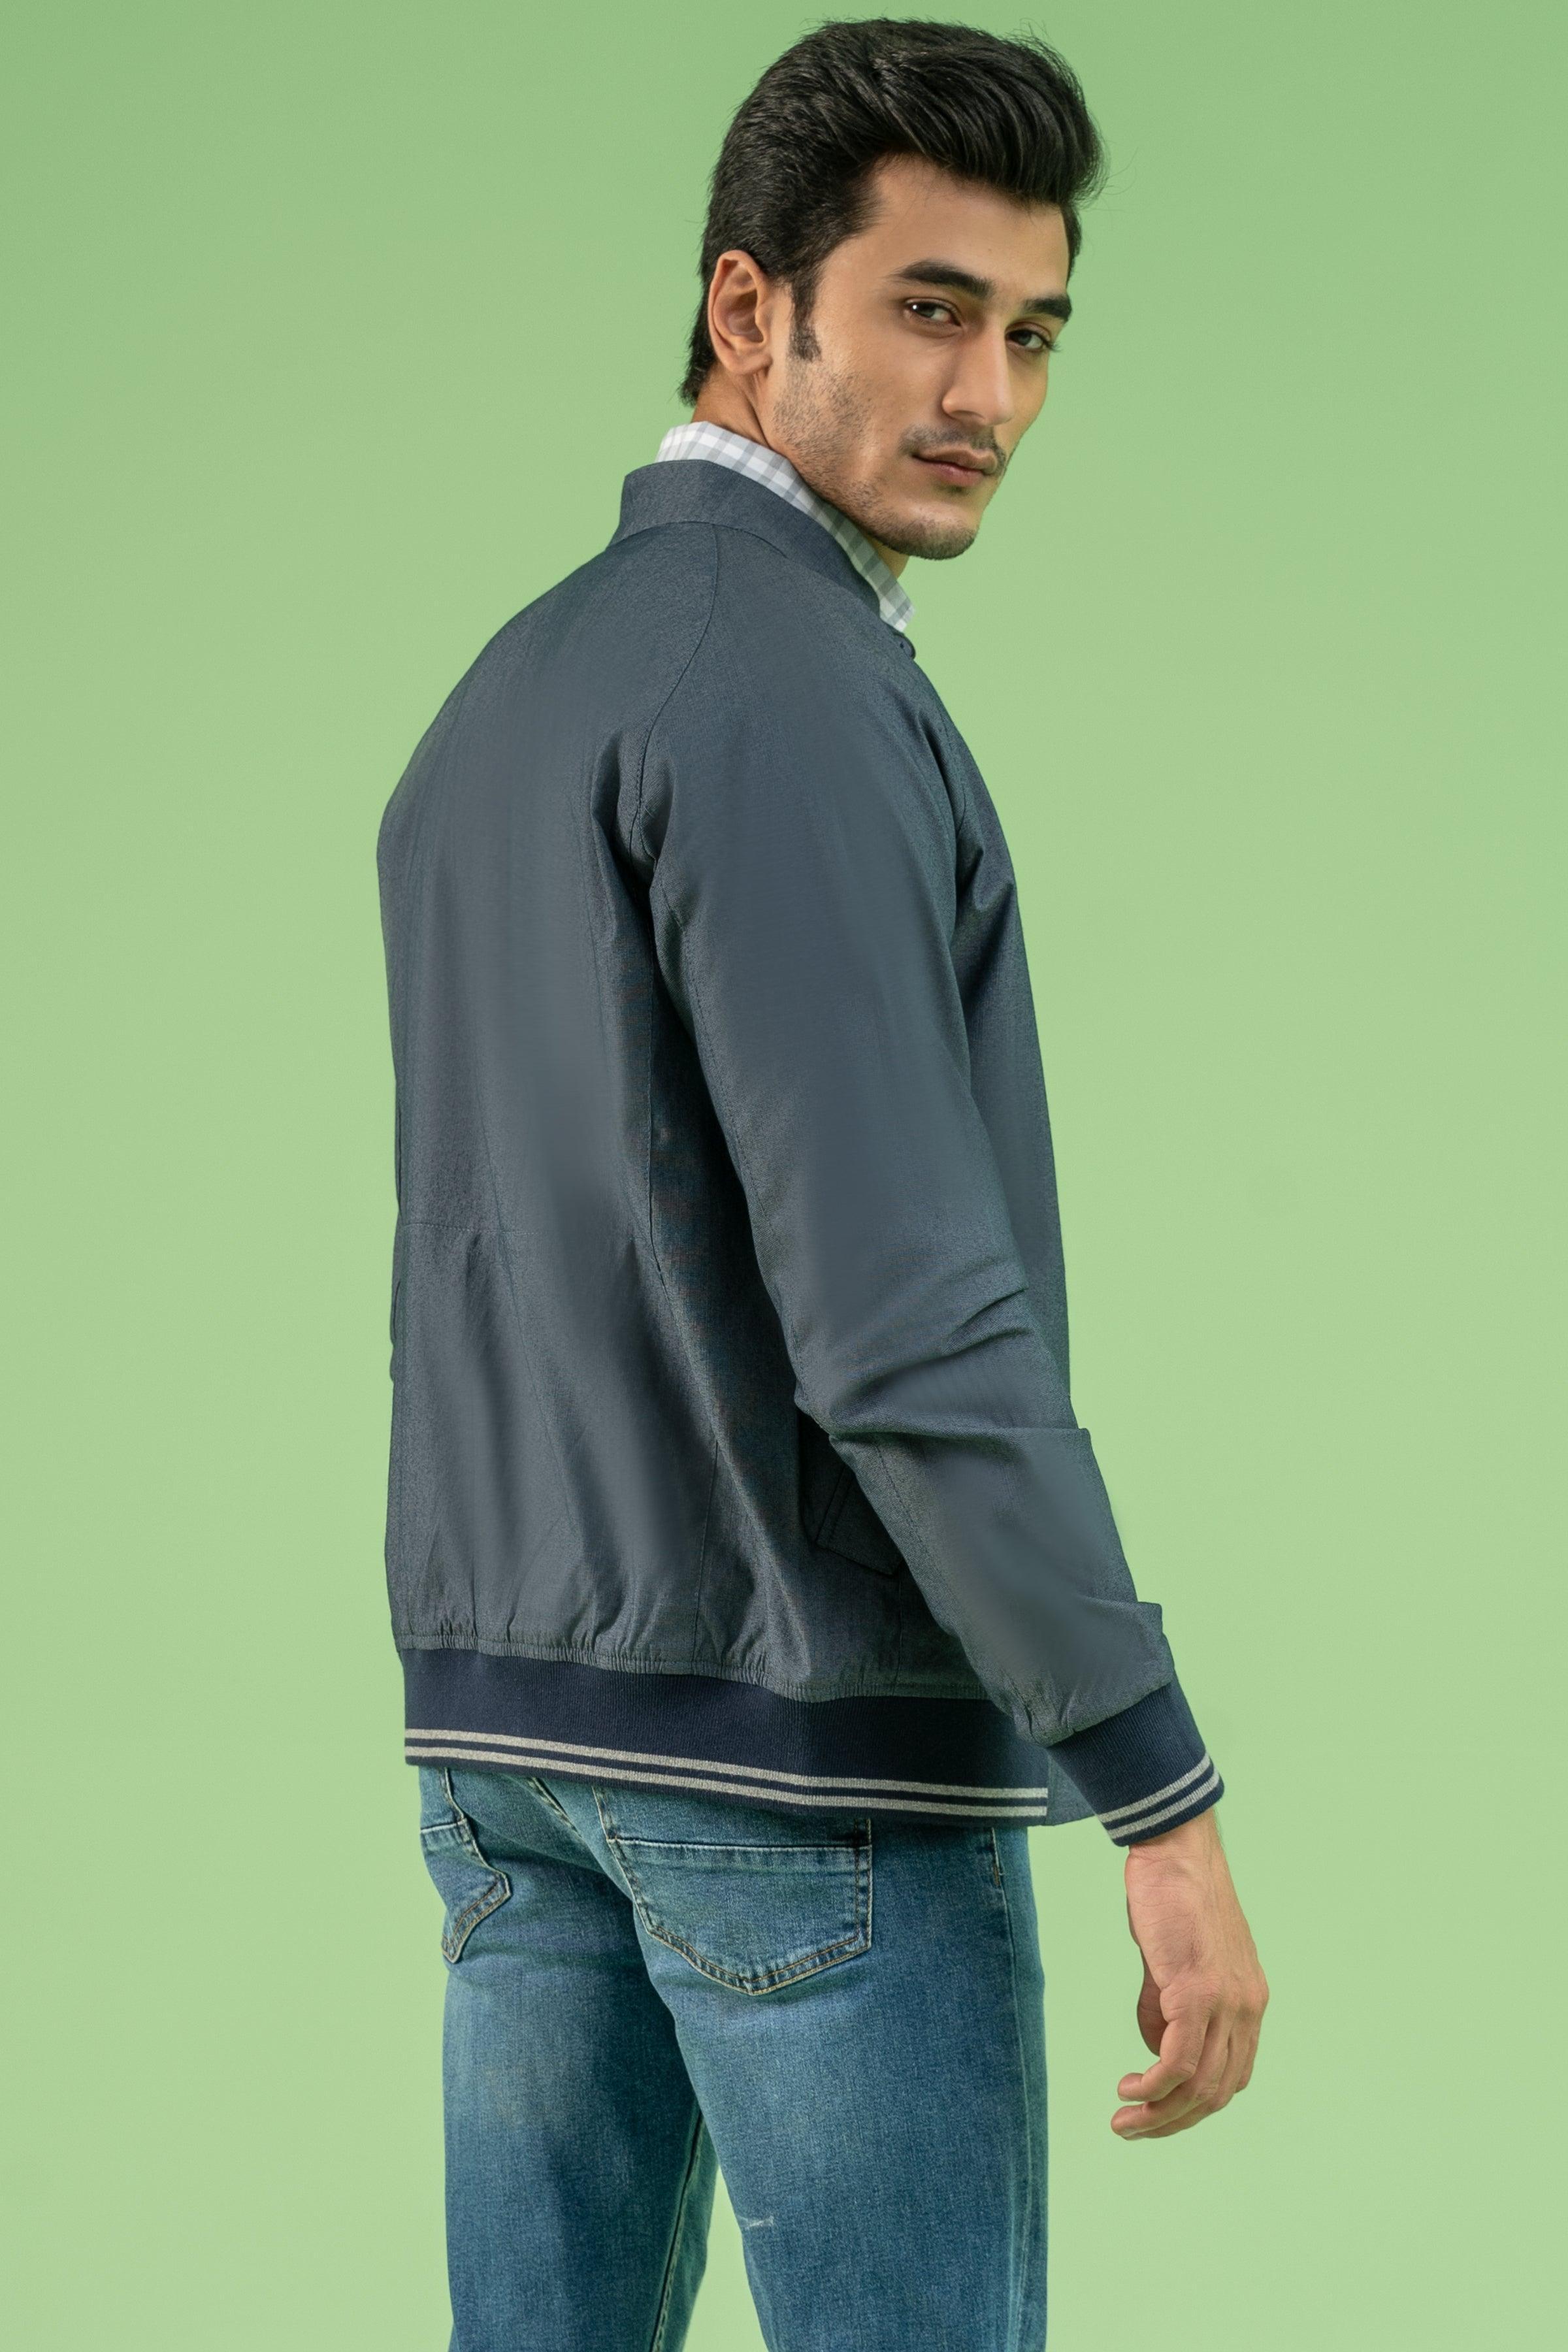 FULL SLEEVE TIPPING TEXTURED JACKET NAVY at Charcoal Clothing